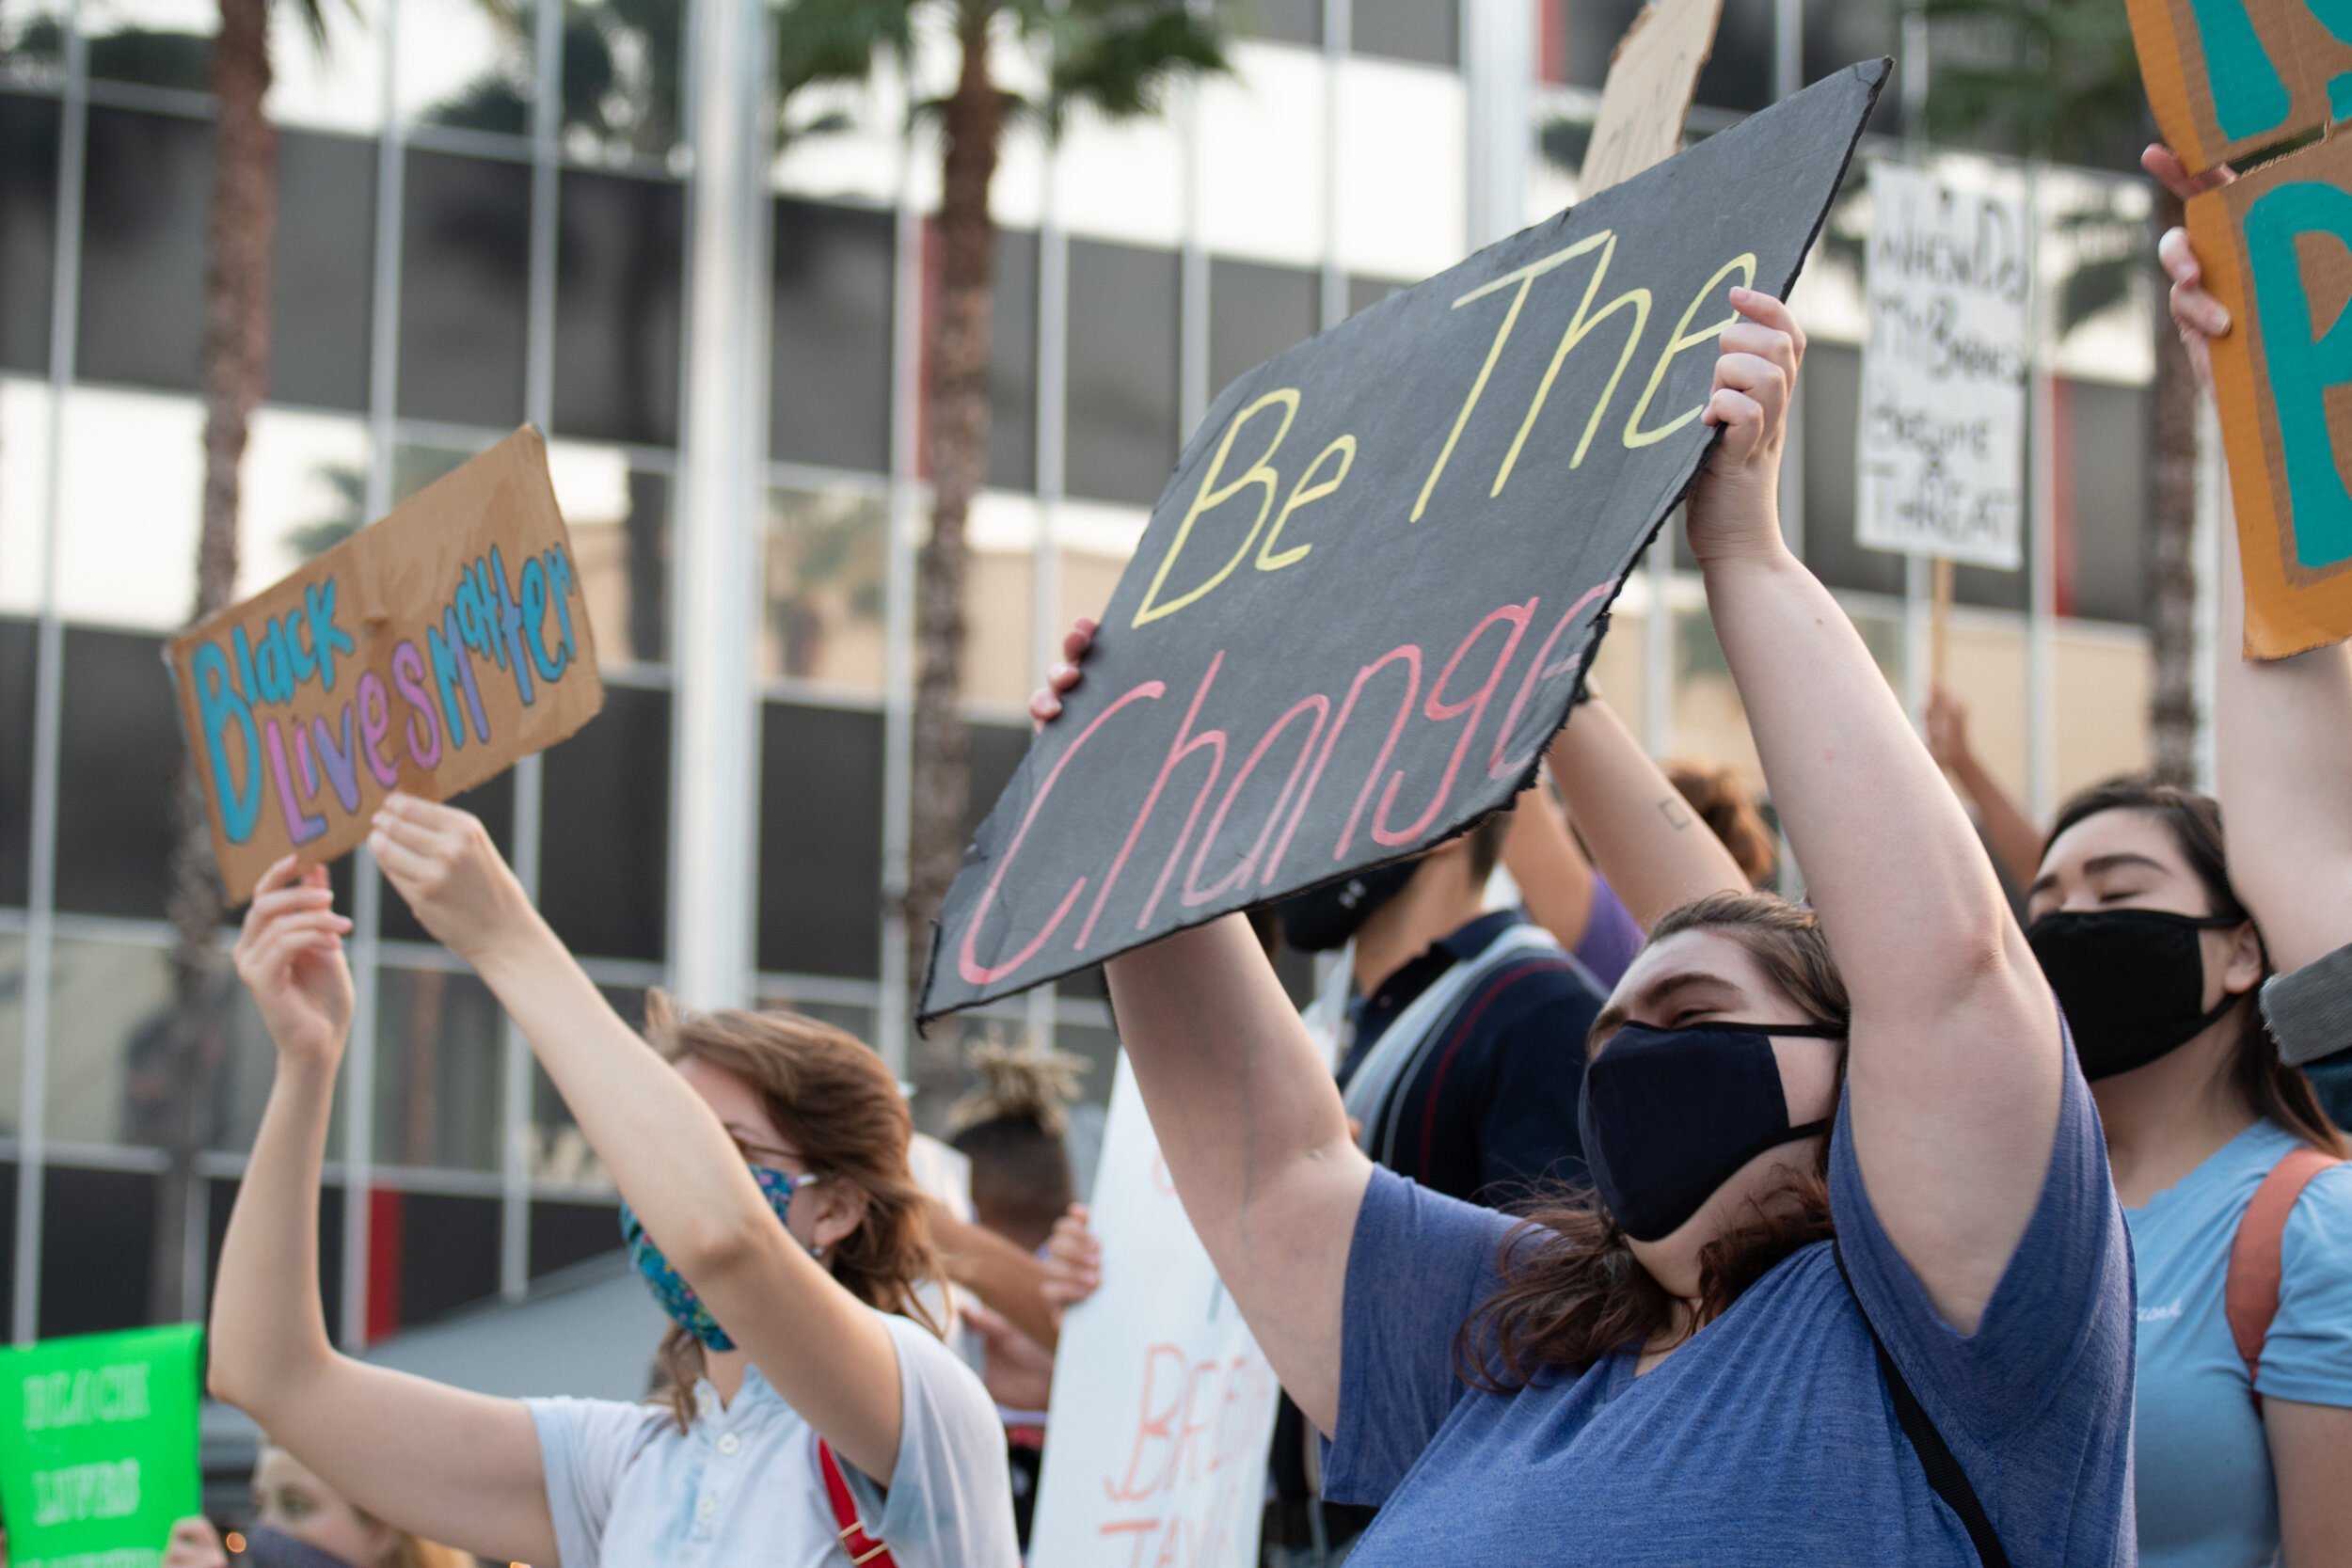   Protesters with The Valley of Change hold up signs at the Sherman Oaks Galleria on Sepulveda Blvd and Ventura Blvd in Sherman Oaks, Calif. on Saturday, Sept. 26, 2020. (Michael Goldsmith / The Corsair)  